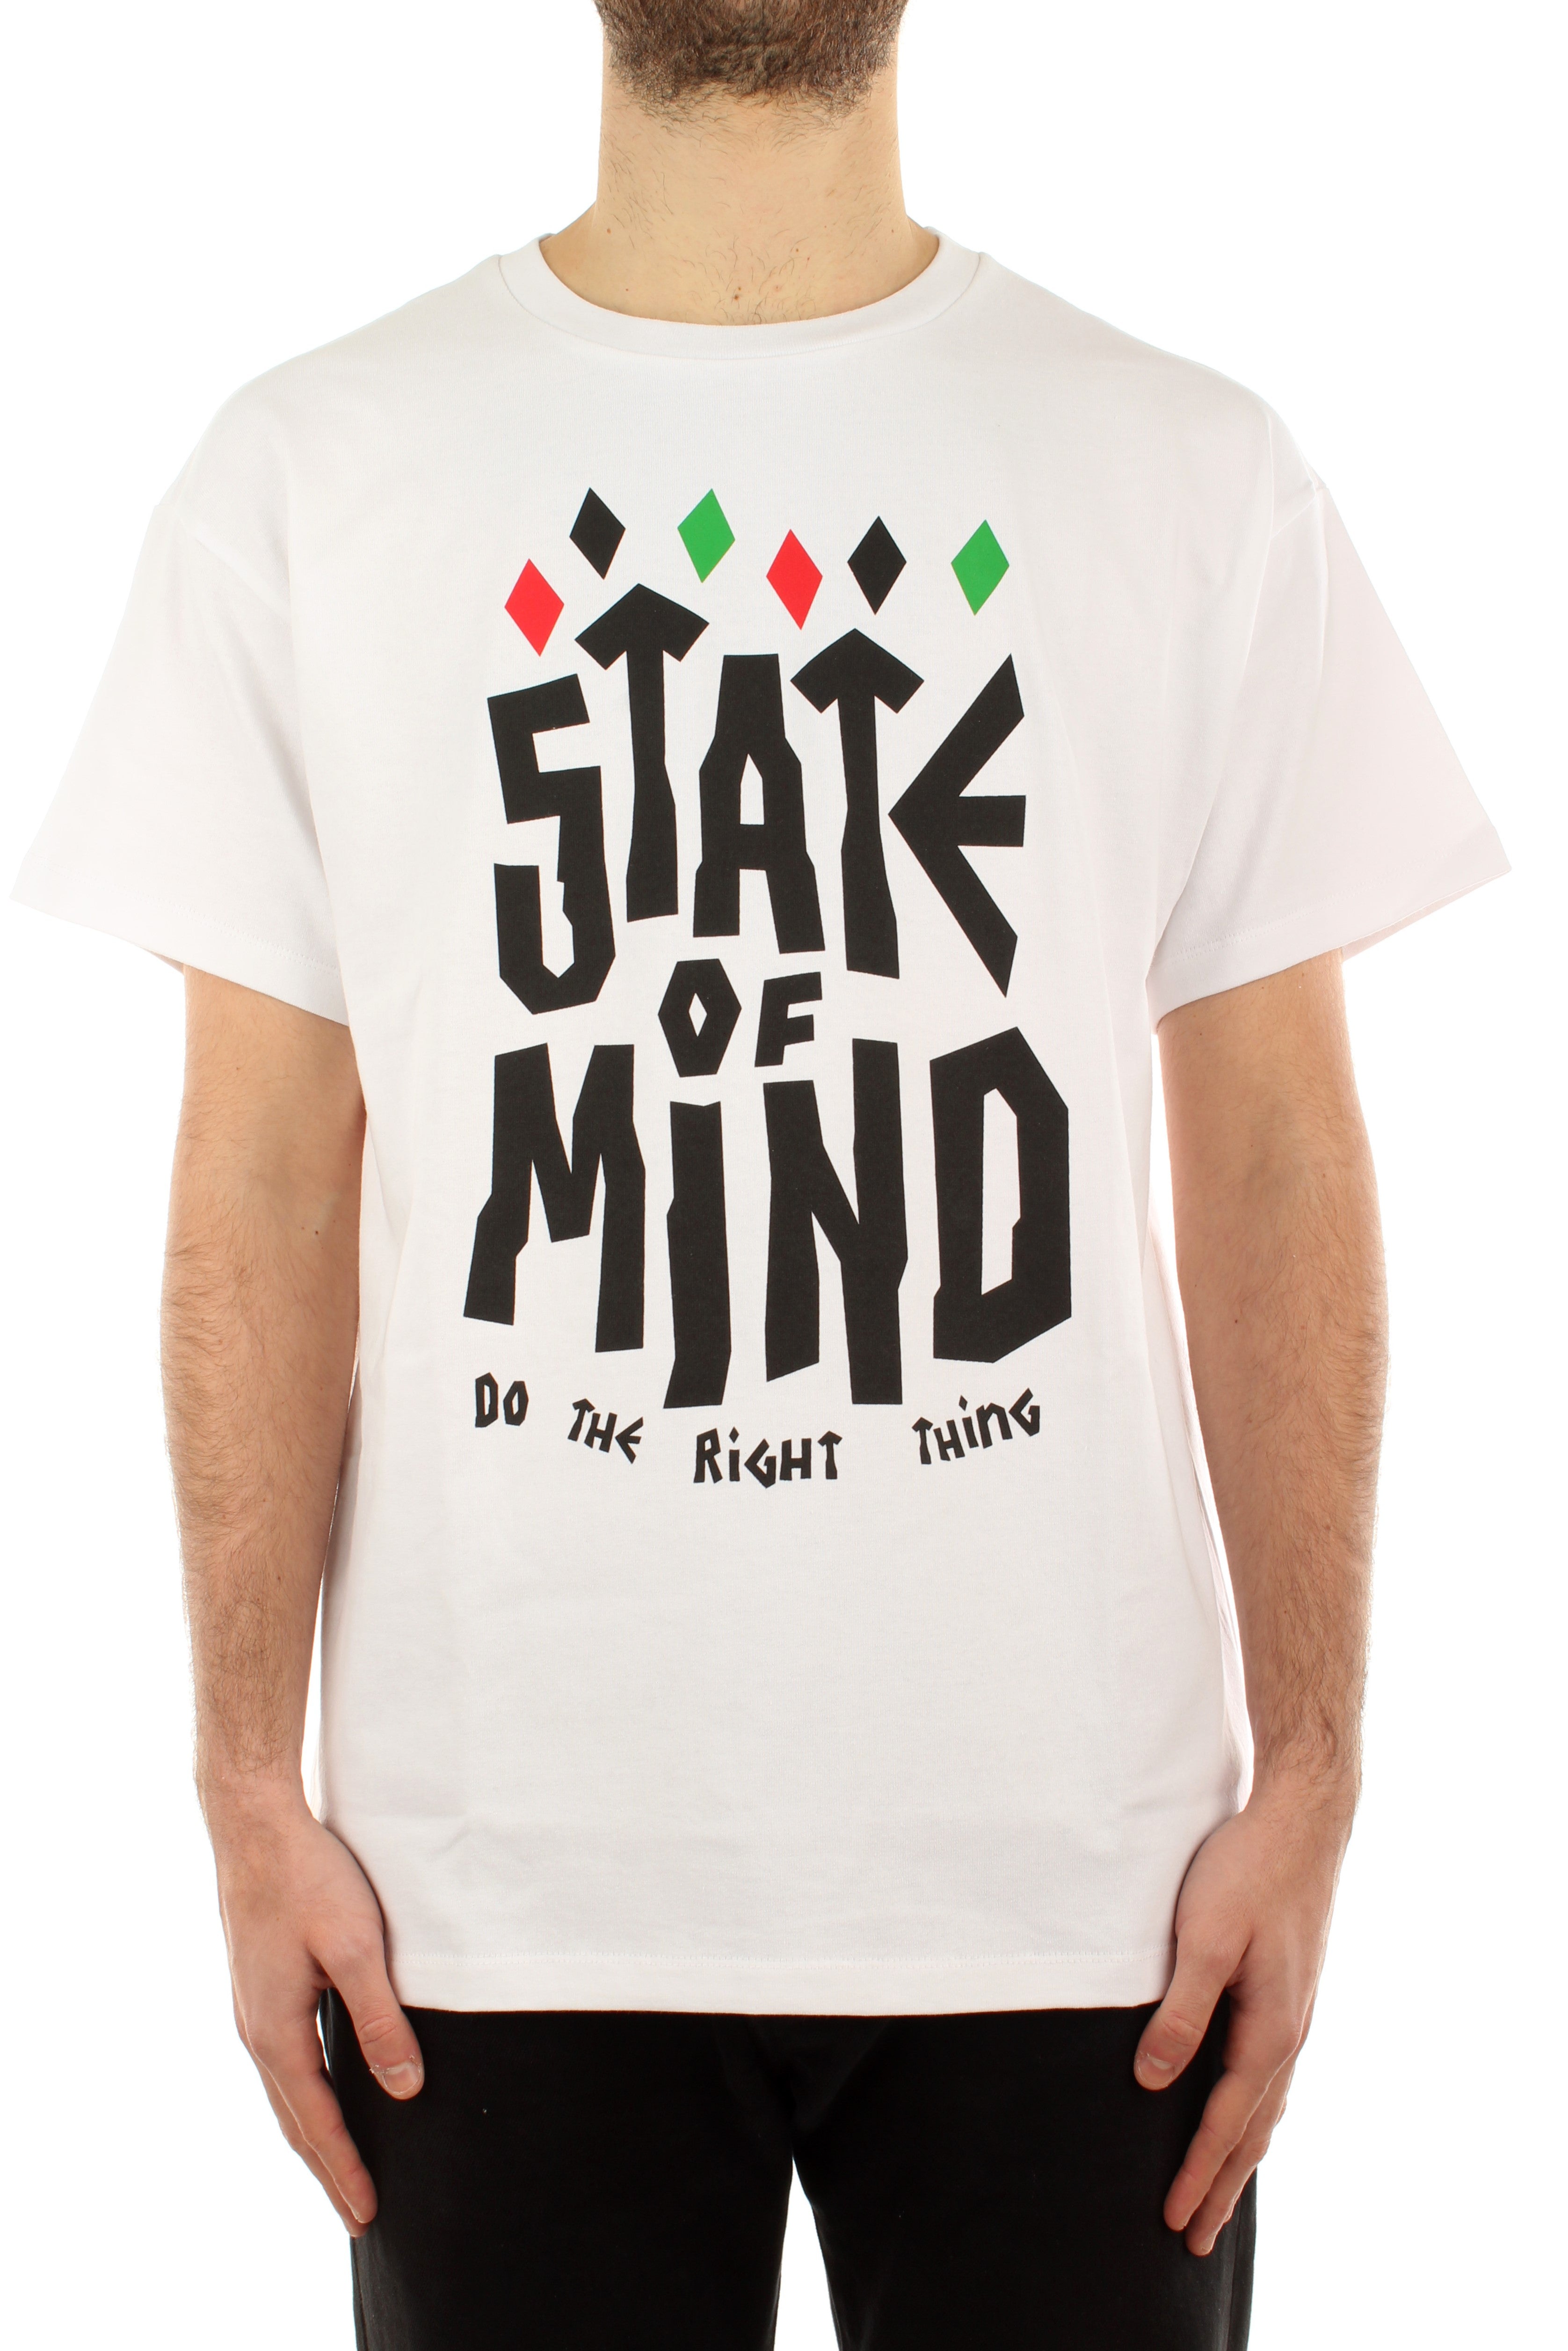 Do The Right Thing T-Shirt